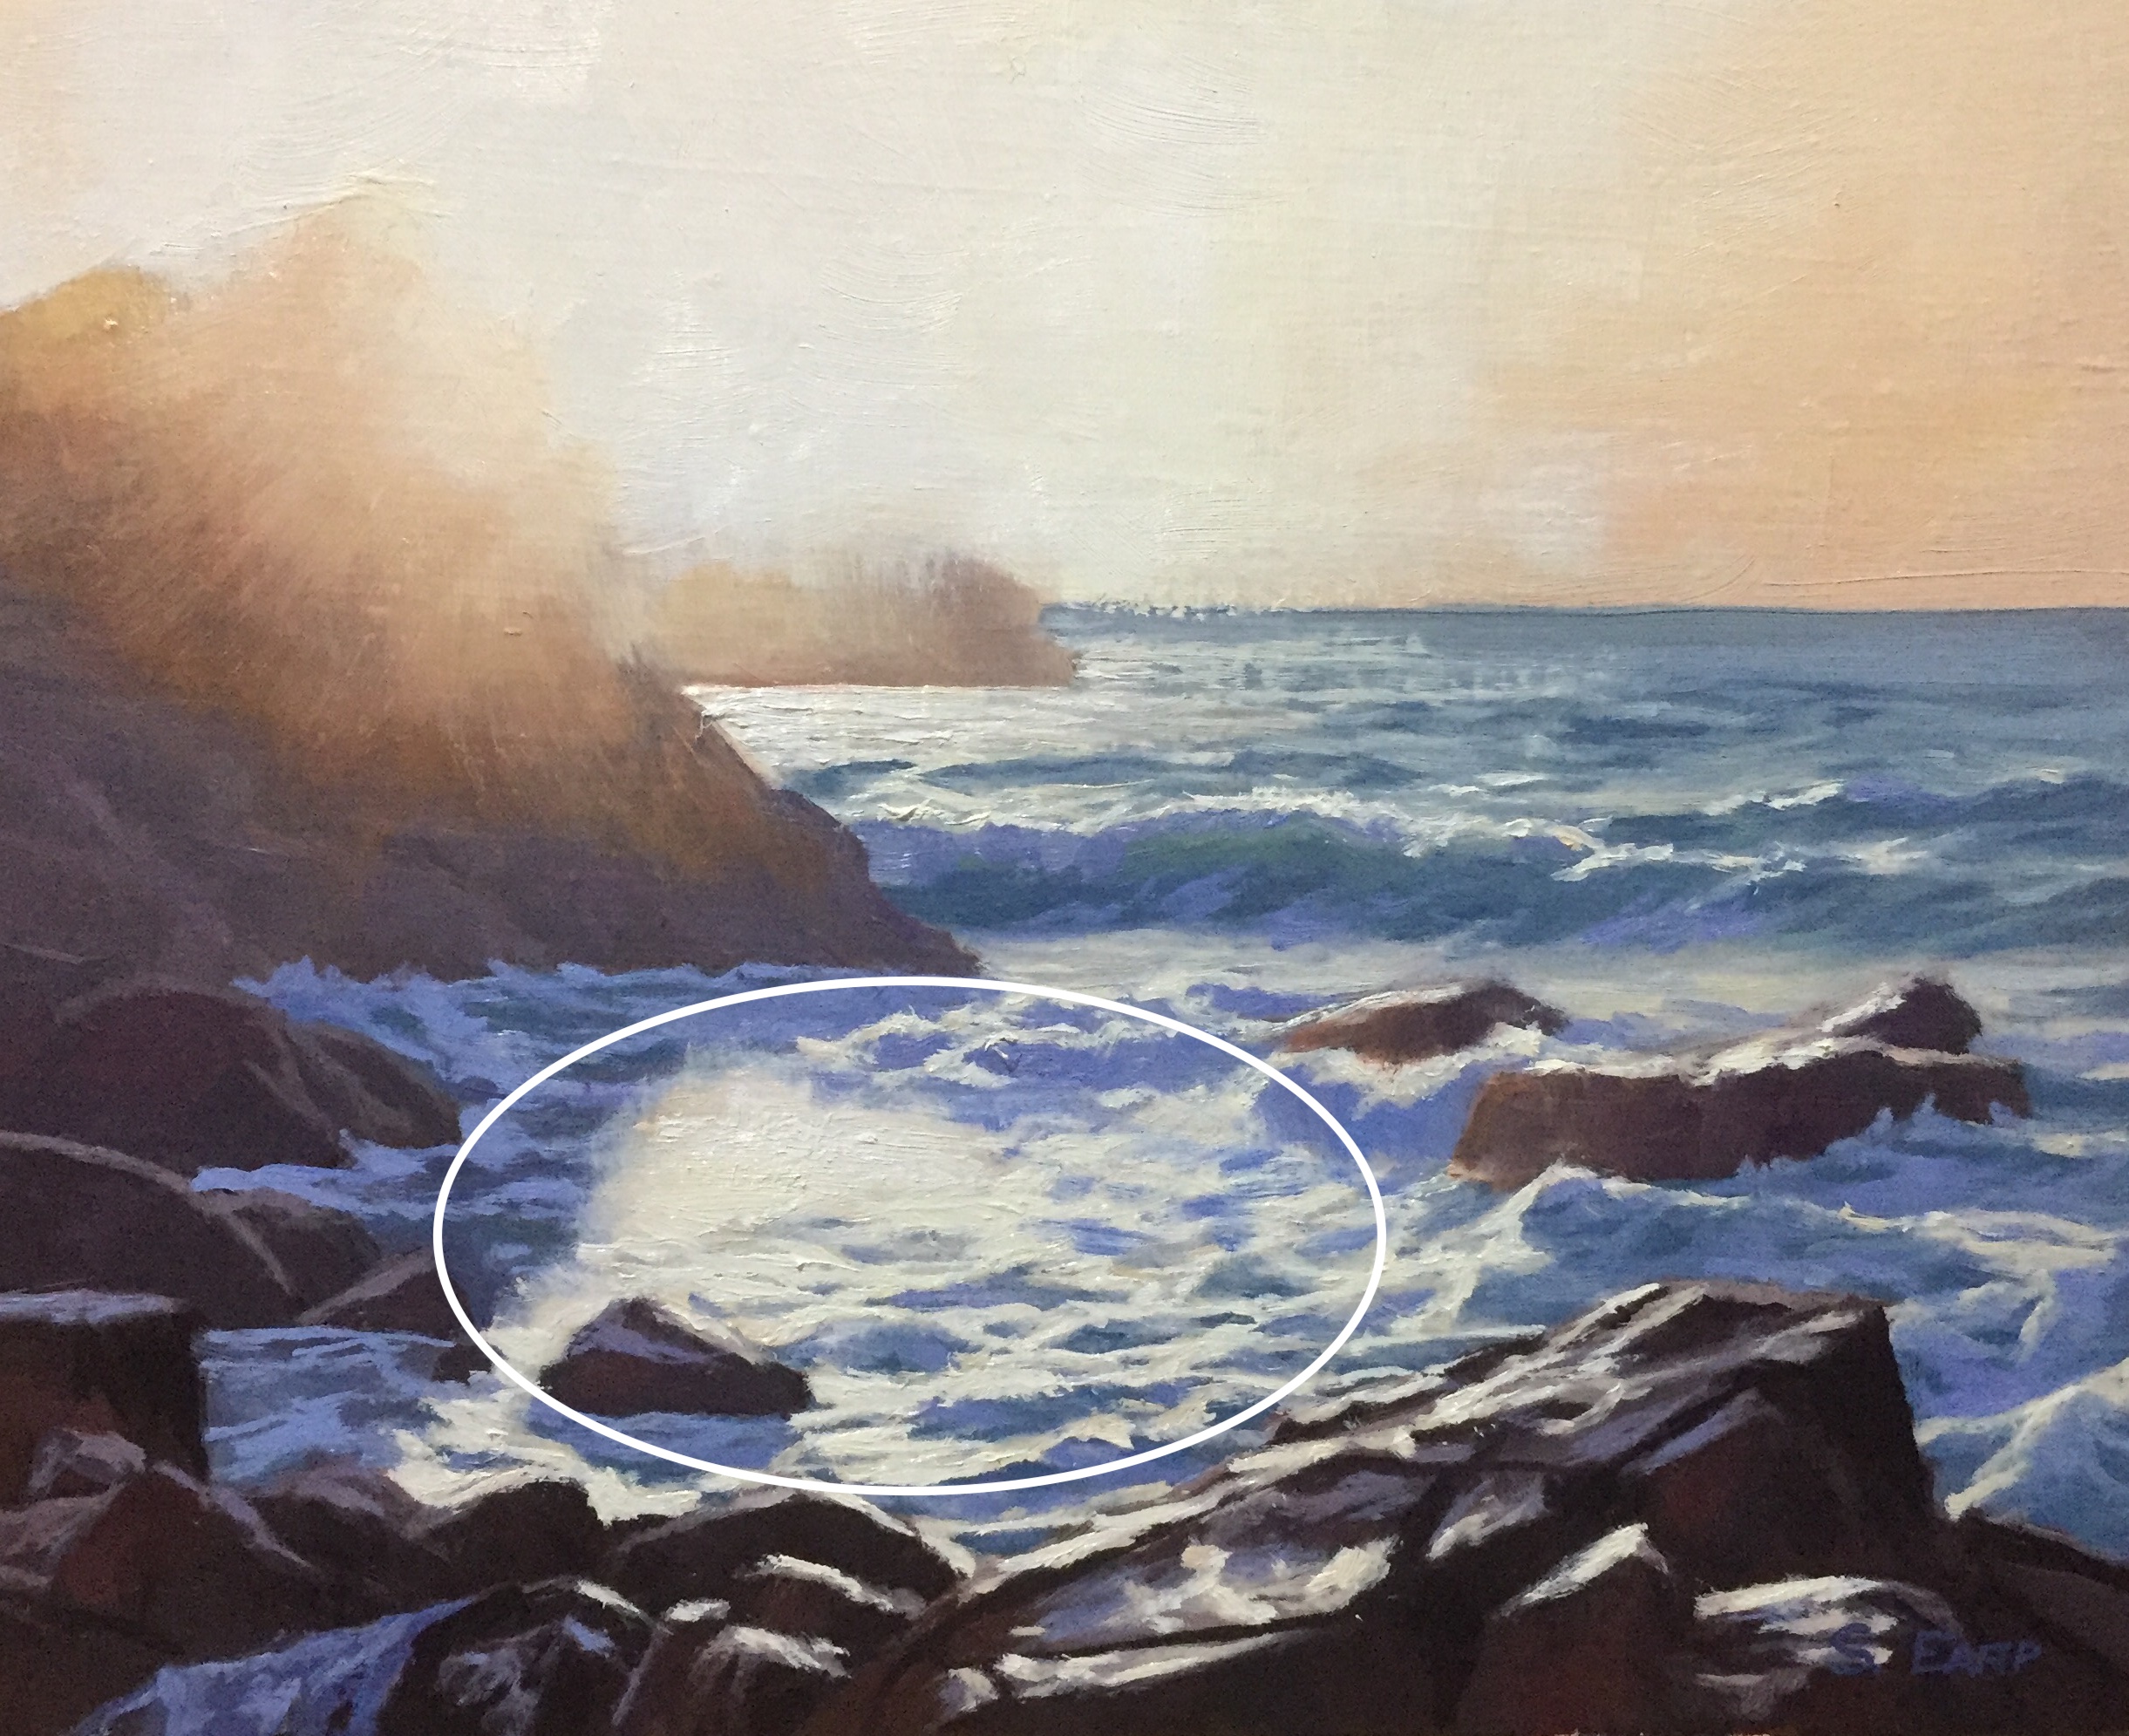 Circle or O composition - Sunset Guernsey - oil painting - seascape - Samuel Earp copy.jpg